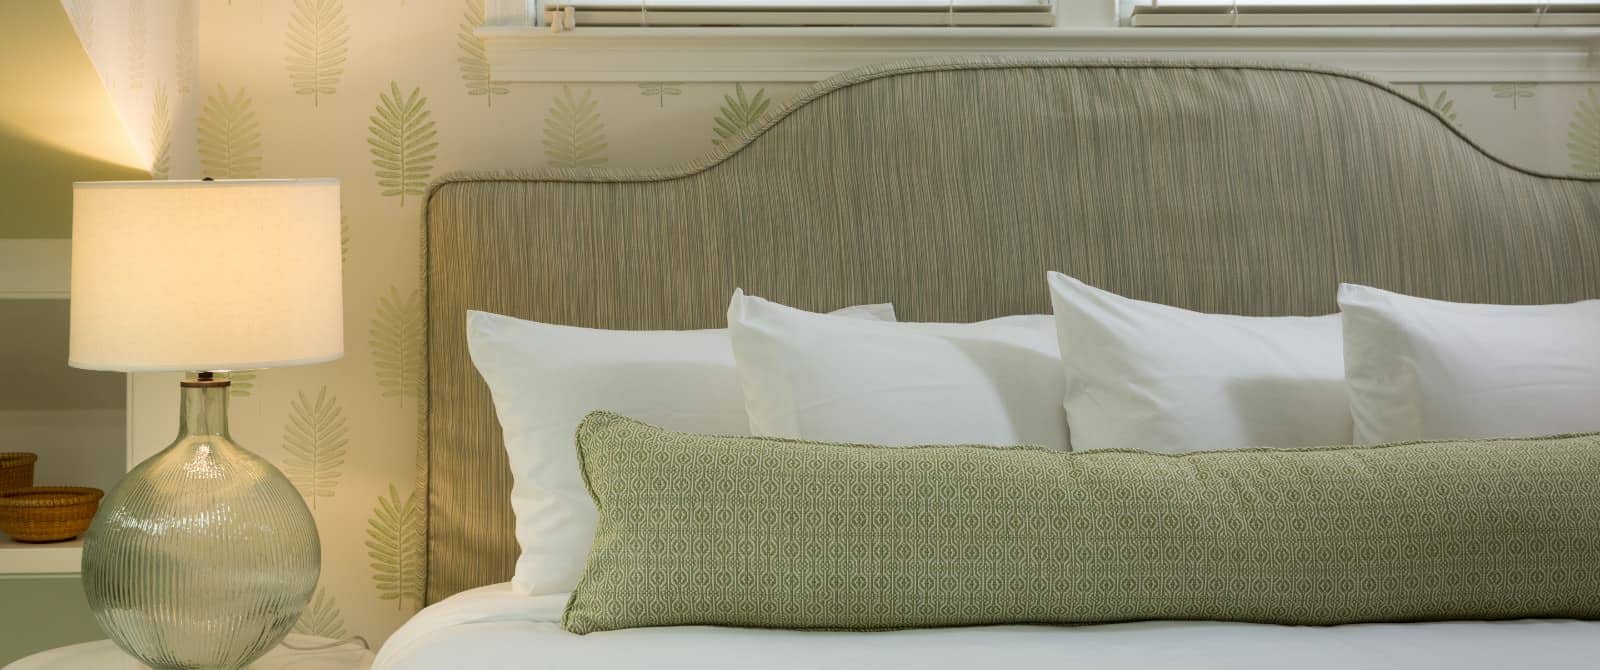 Close up view of light green upholstered headboard, white bedding, patterned light sage pillow, and lighted lamp